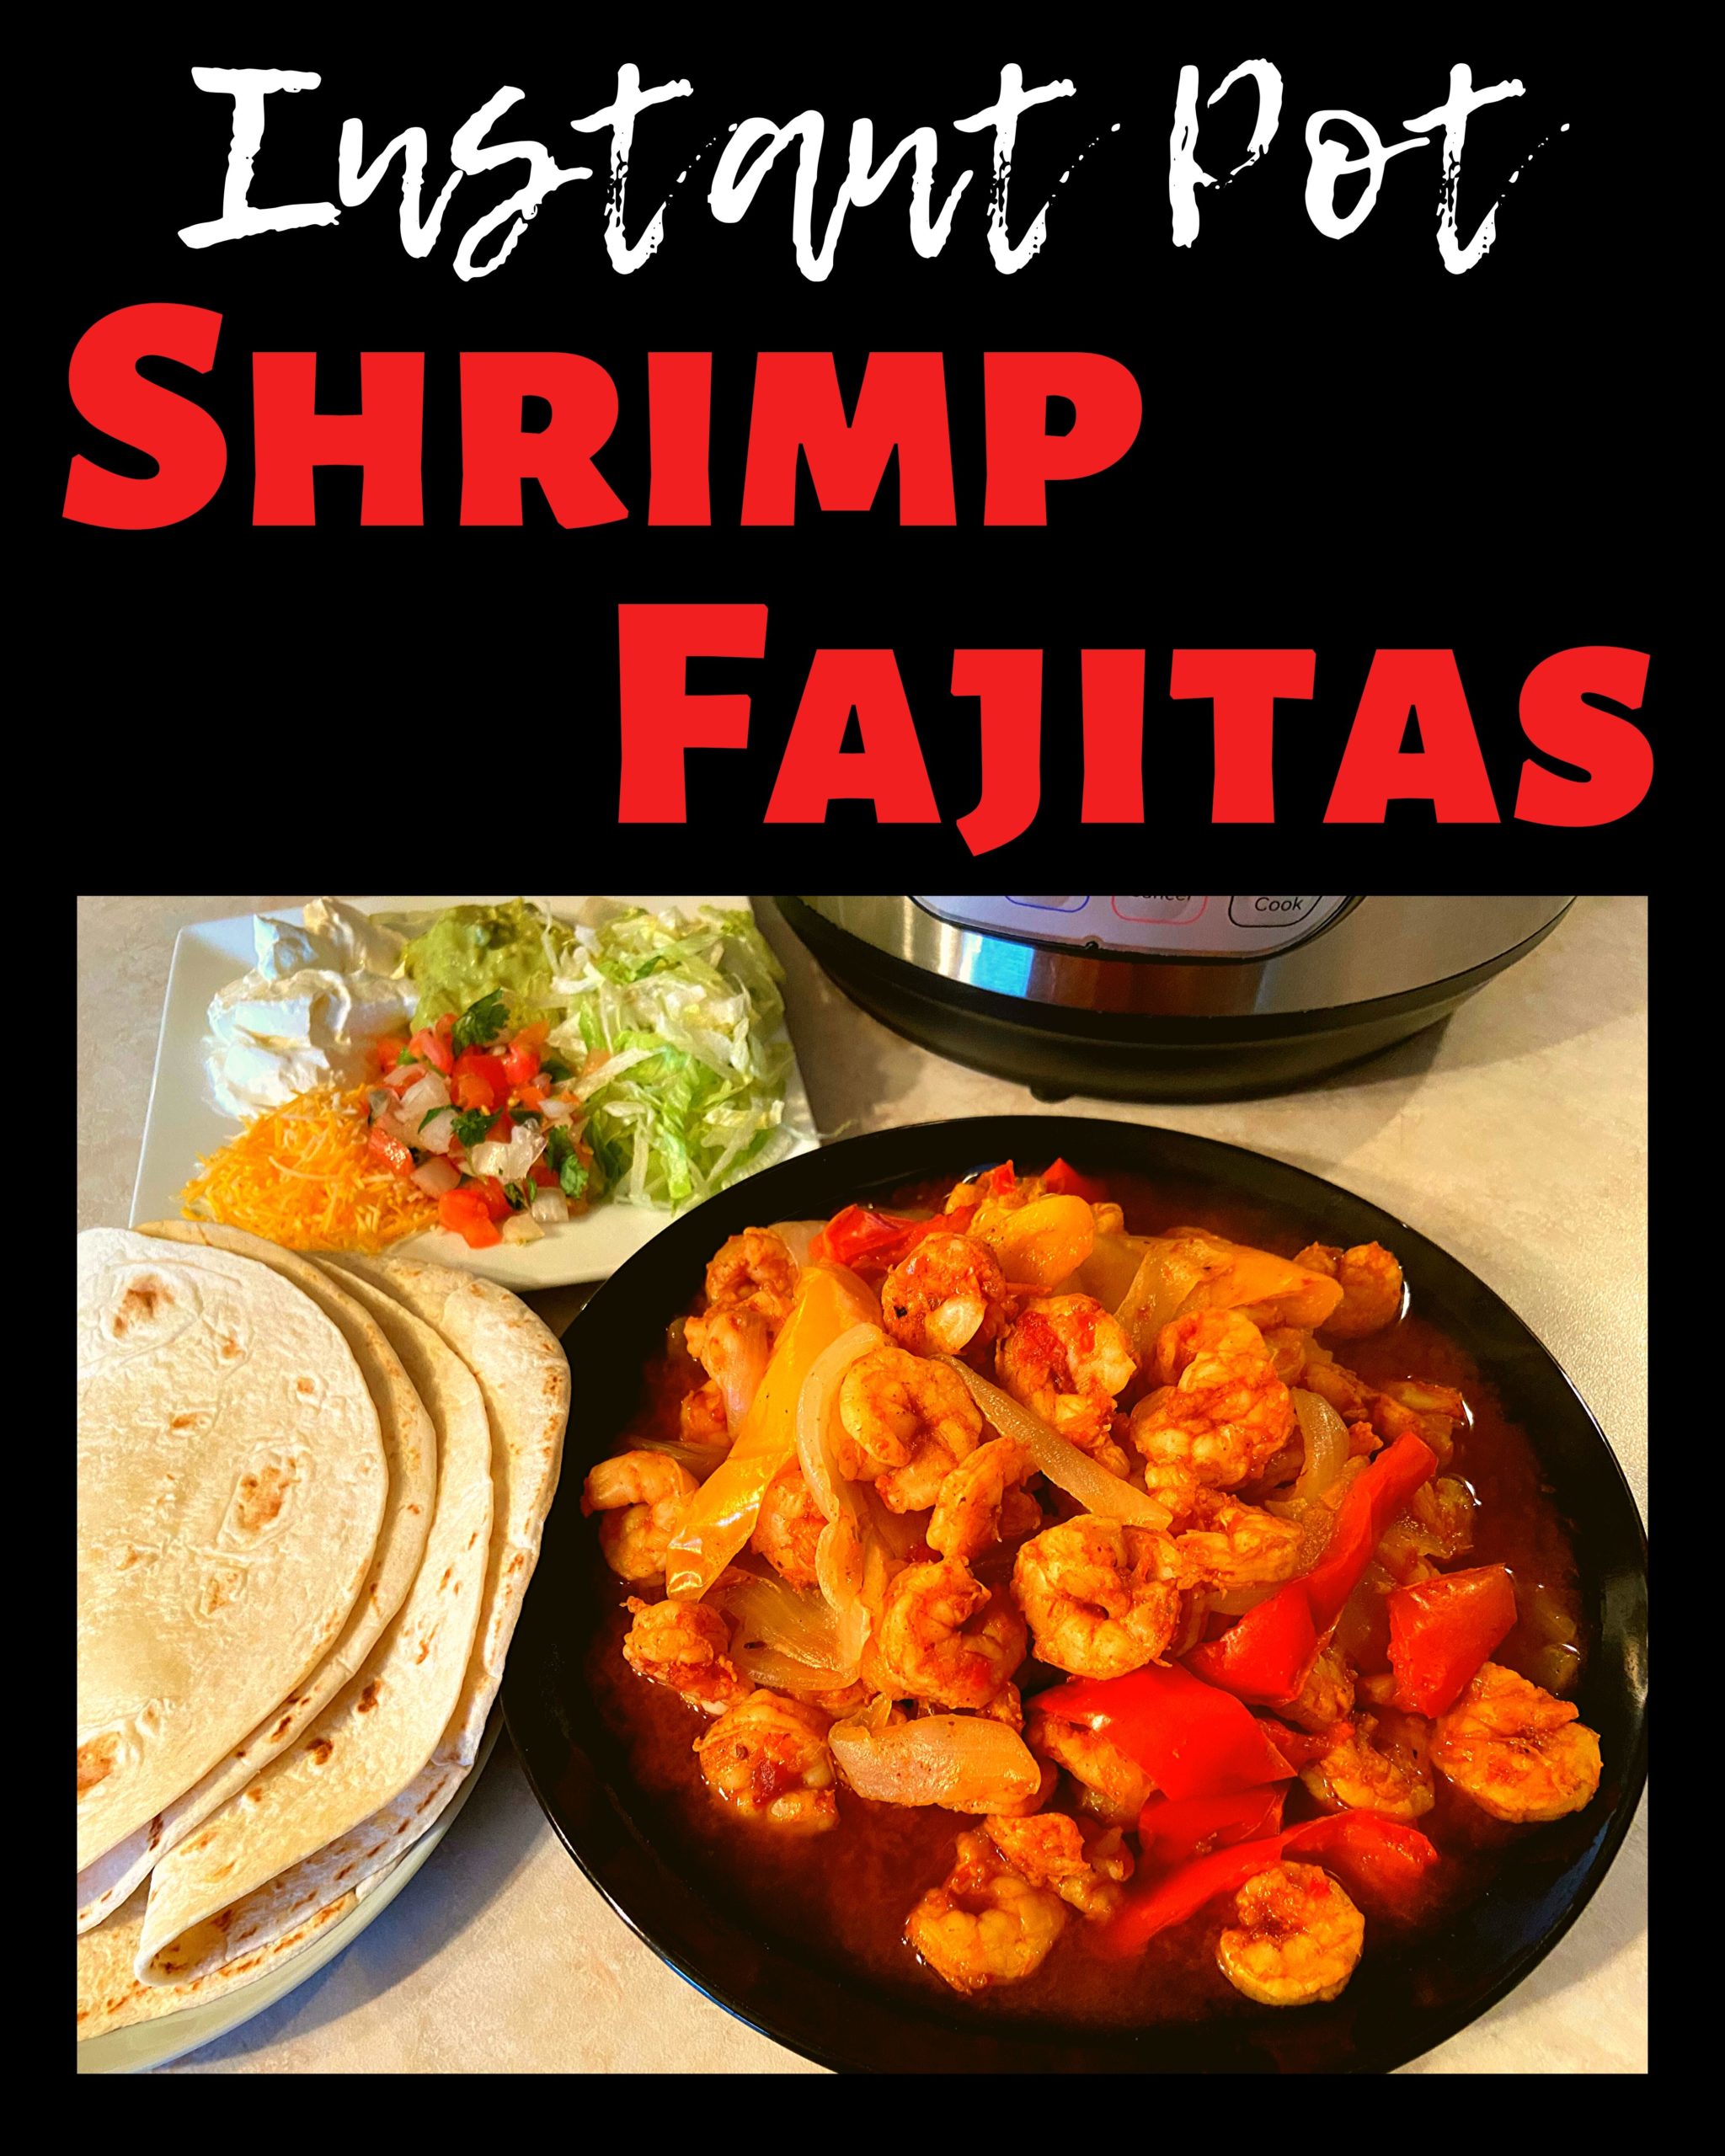 A black plate filled with cooked shrimp, onions, and bell peppers in a fajita seasoning. A white plate filled with lettuce, sour cream, guacamole, pico de gallo, and shredded cheese. A white plate with flour tortillas. Everything is on a kitchen counter in front of an Instant Pot.